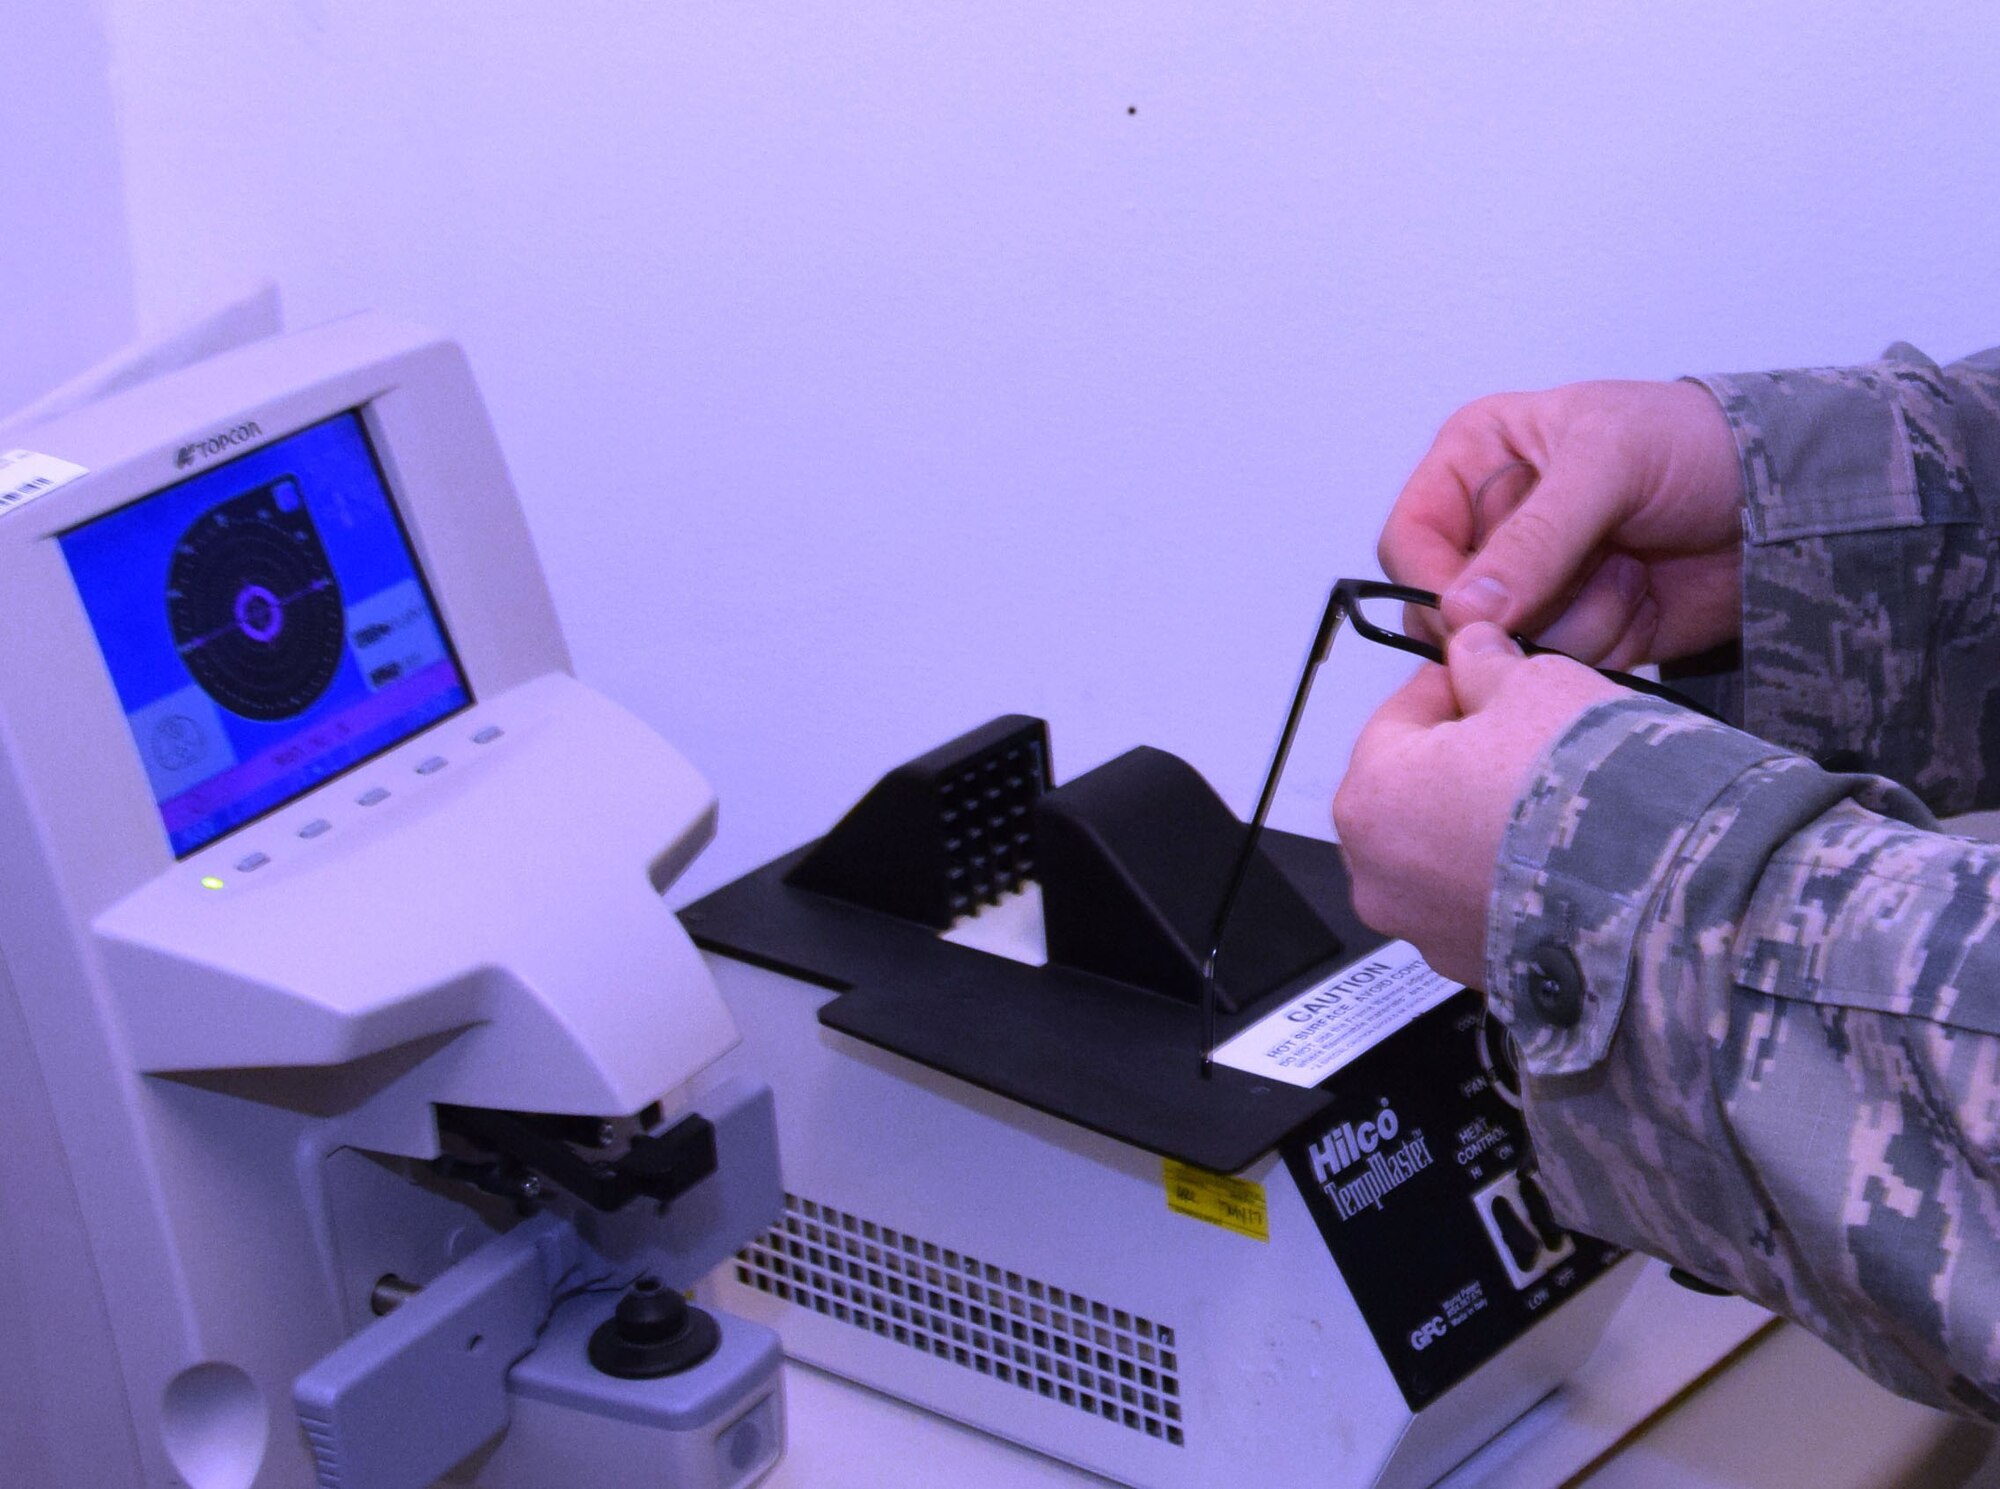 Staff Sgt. Andrew P. Heath, ophthalmic technician at the 379th Expeditionary Medical Operations Squadron, replaces a lens from a pair of government-issued glasses for a patient Aug. 2, 2016, at Al Udeid Air Base, Qatar.  The optometry clinic is stocked with both a lensometer, which determines the prescription of a pair of glasses, and a lens warmer, which warms a pair of frames to allow the technician to repair the frame here rather than sending it off-site. (U.S. Air Force photo/Technical Sgt. Carlos J. Treviño/Released)